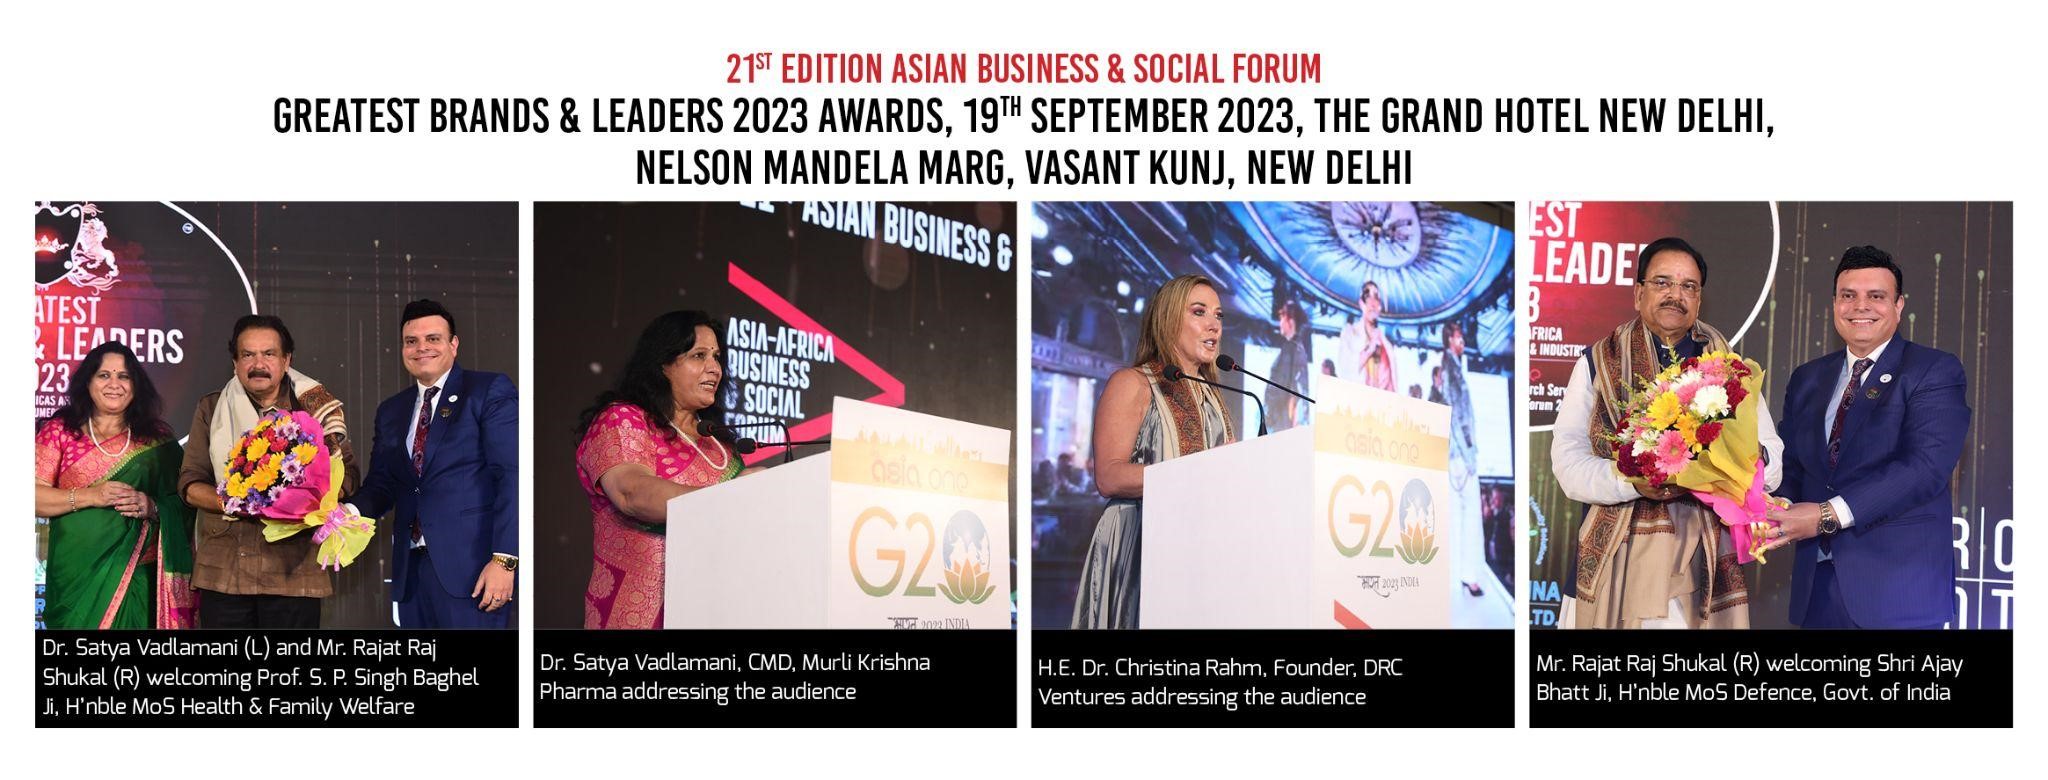 21st Asian Business & Social Forum 2023 & The Healthier India Conclave 2023 .